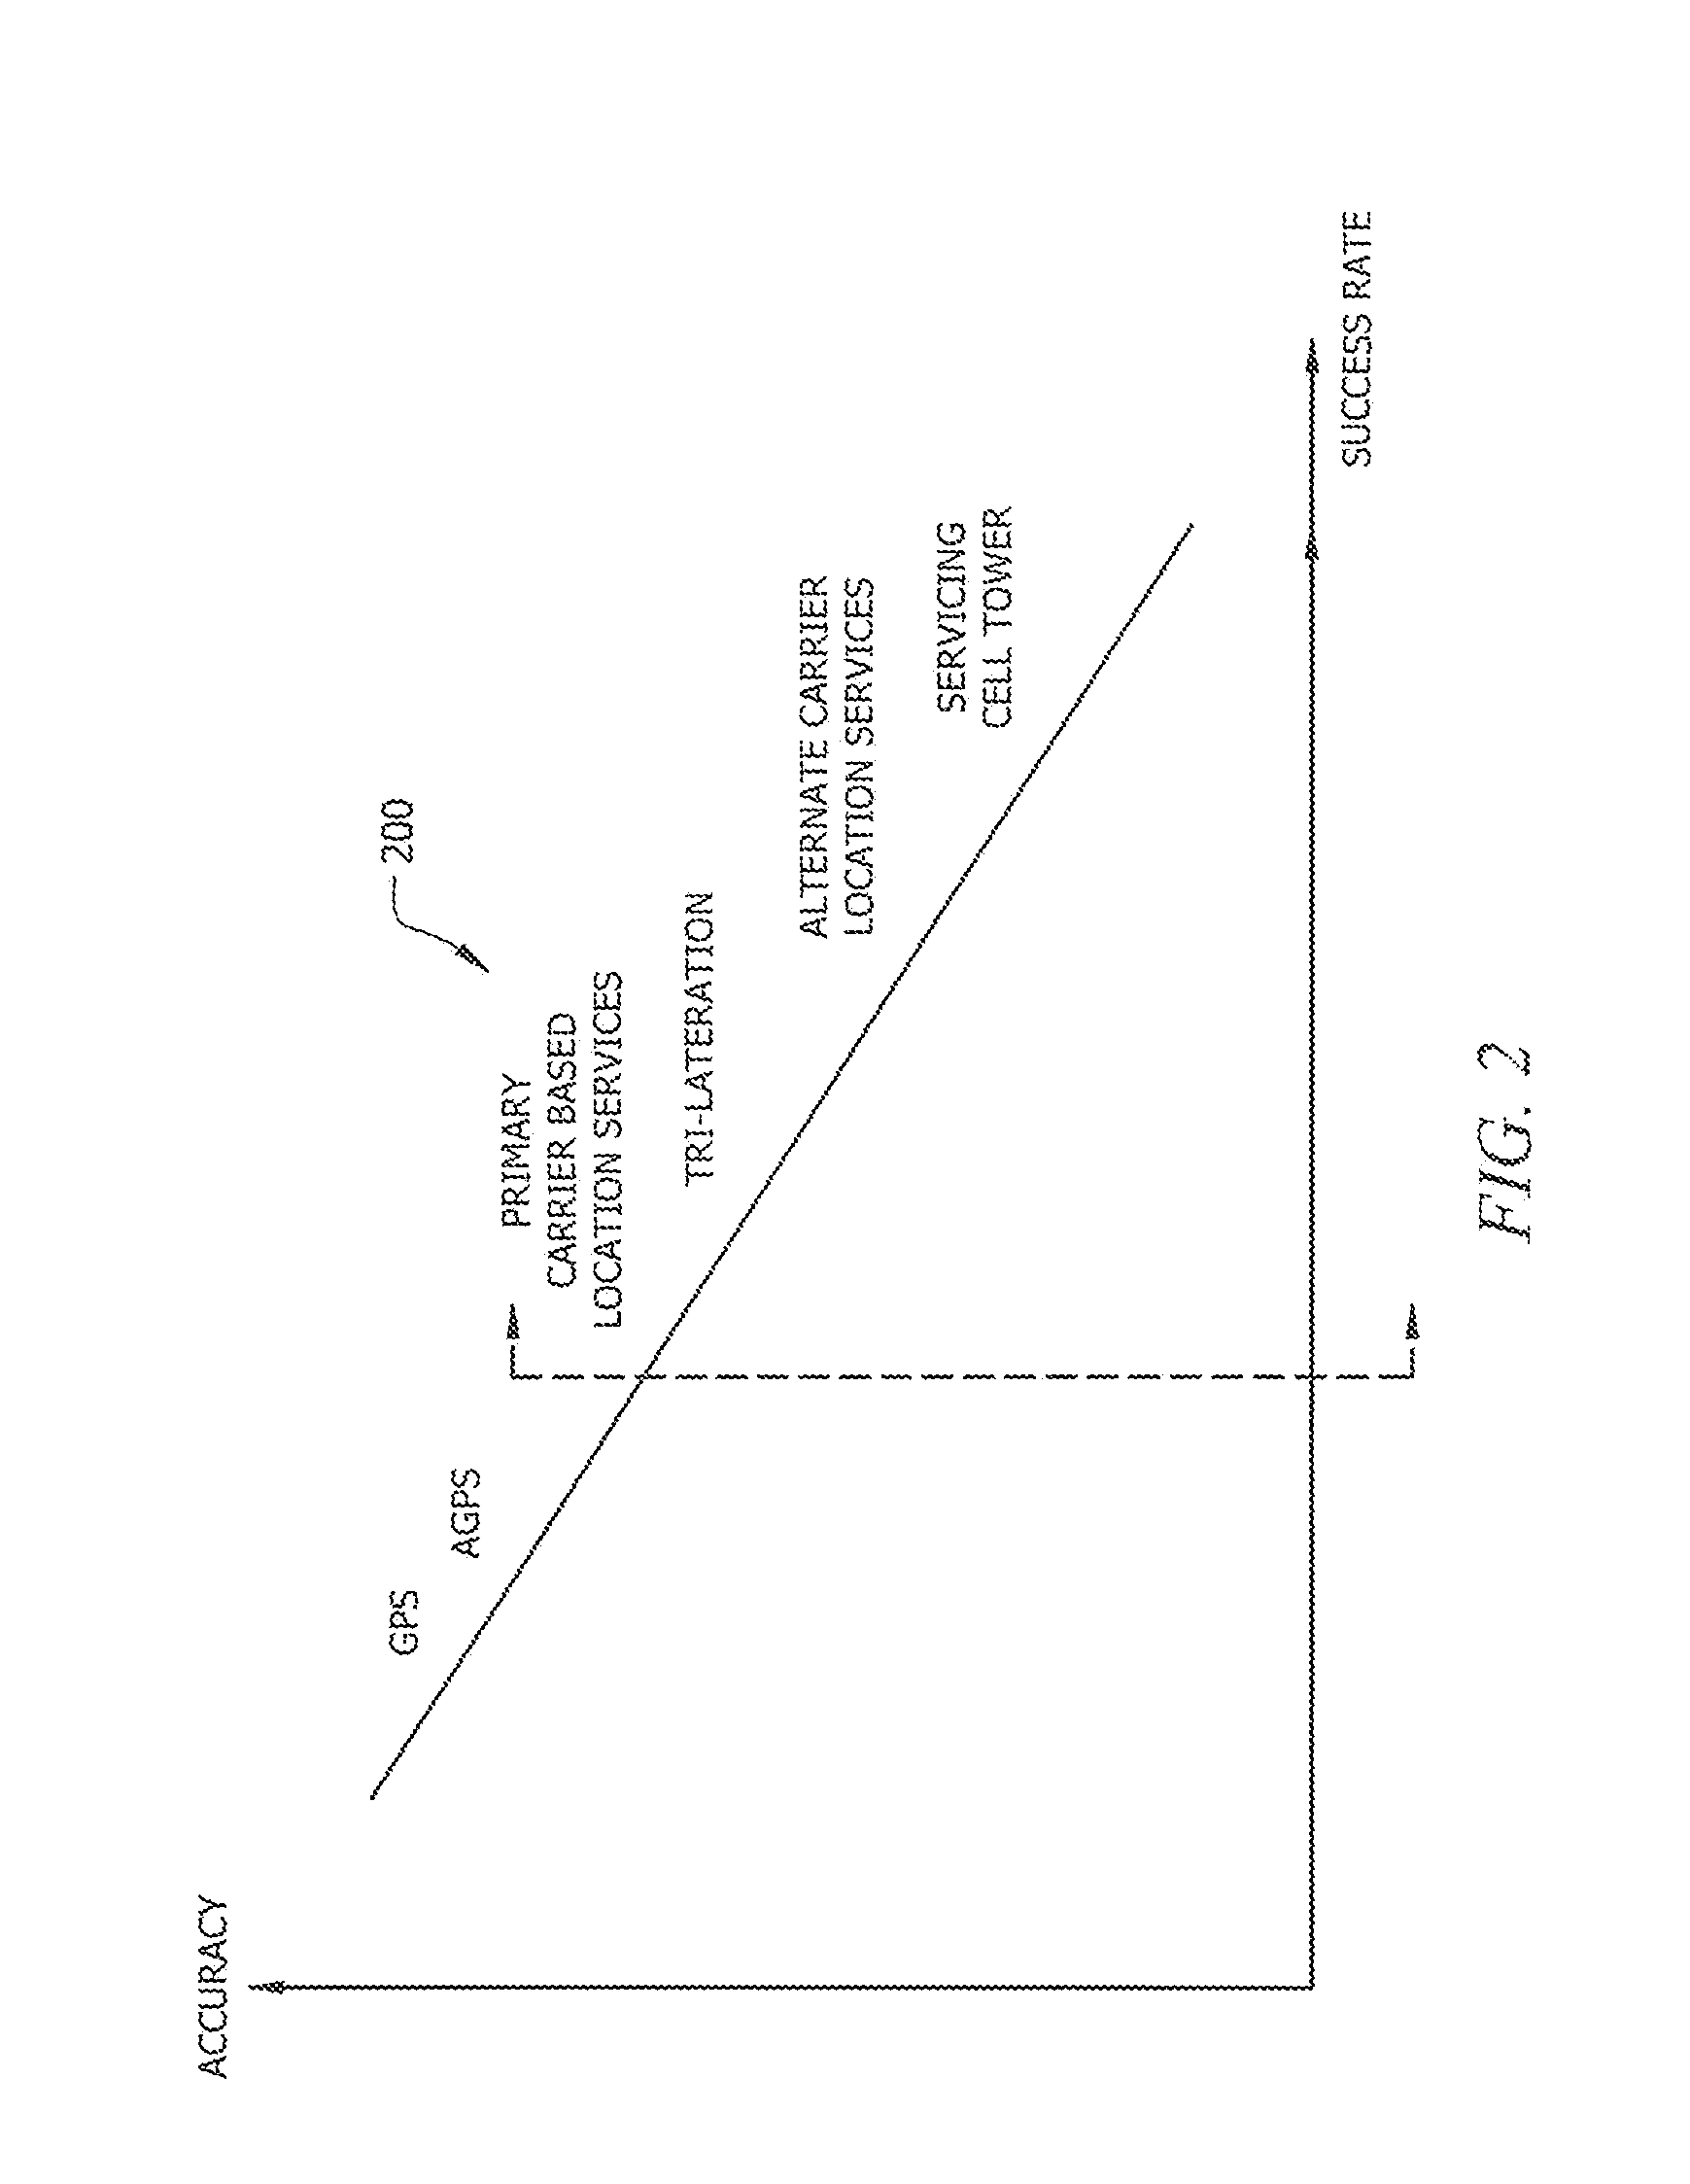 System and Method for Determining Best Available Location for a Mobile Device